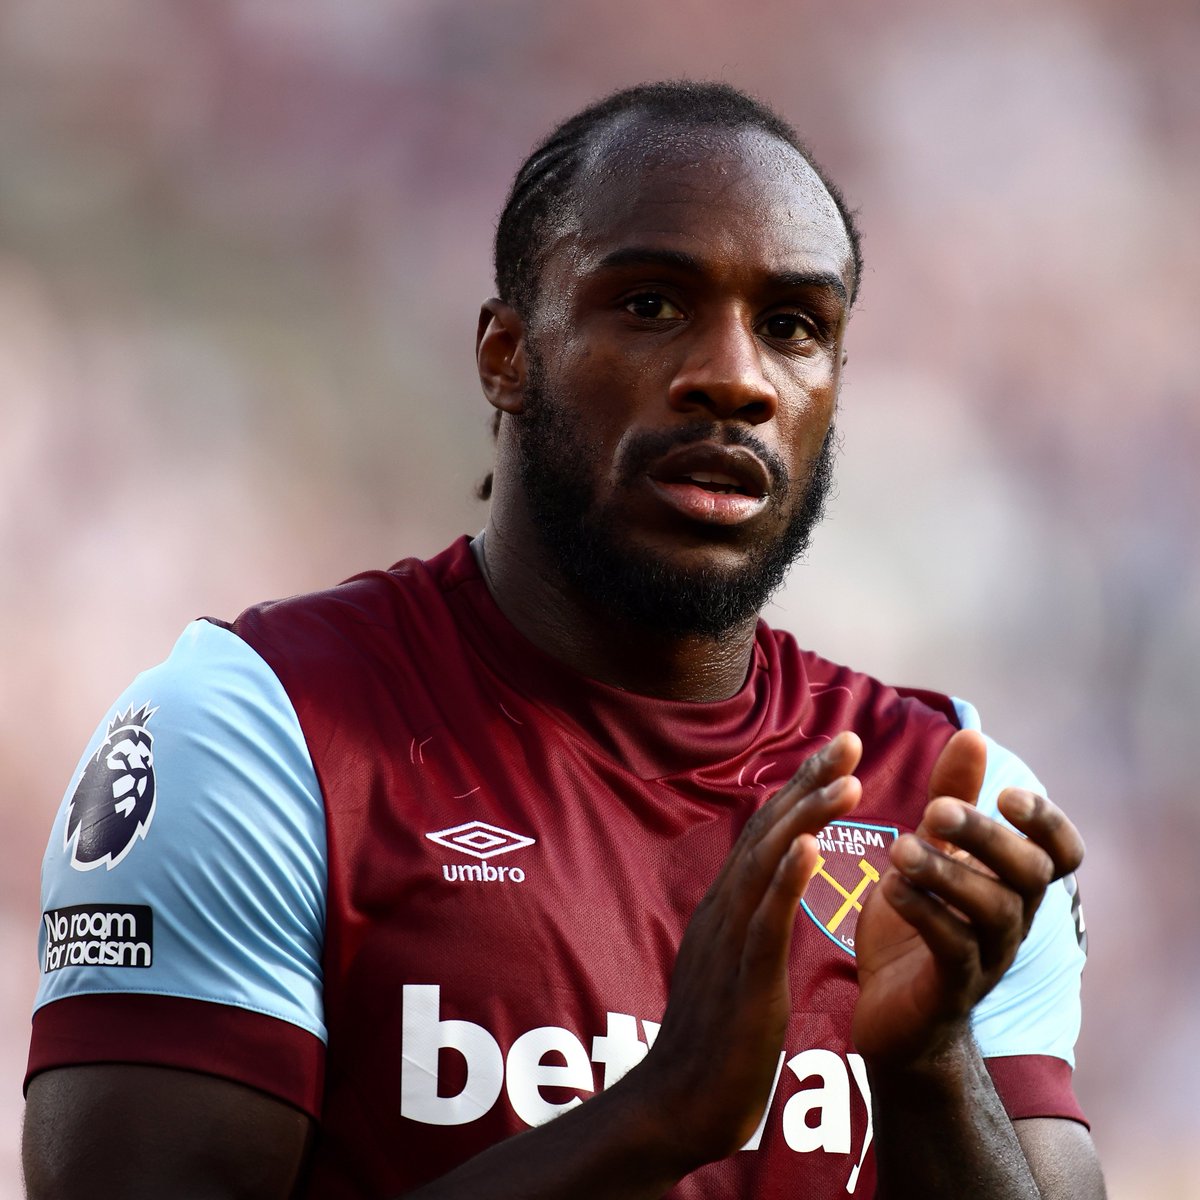 Michail Antonio on Premier League title race: 'If it goes down to the last day, I reckon Arsenal wins it. 'Last game of the season, we [West Ham] have something to play for as well, we’re trying to get into Europe, Man City away,' he told The Footballer’s Football Podcast.